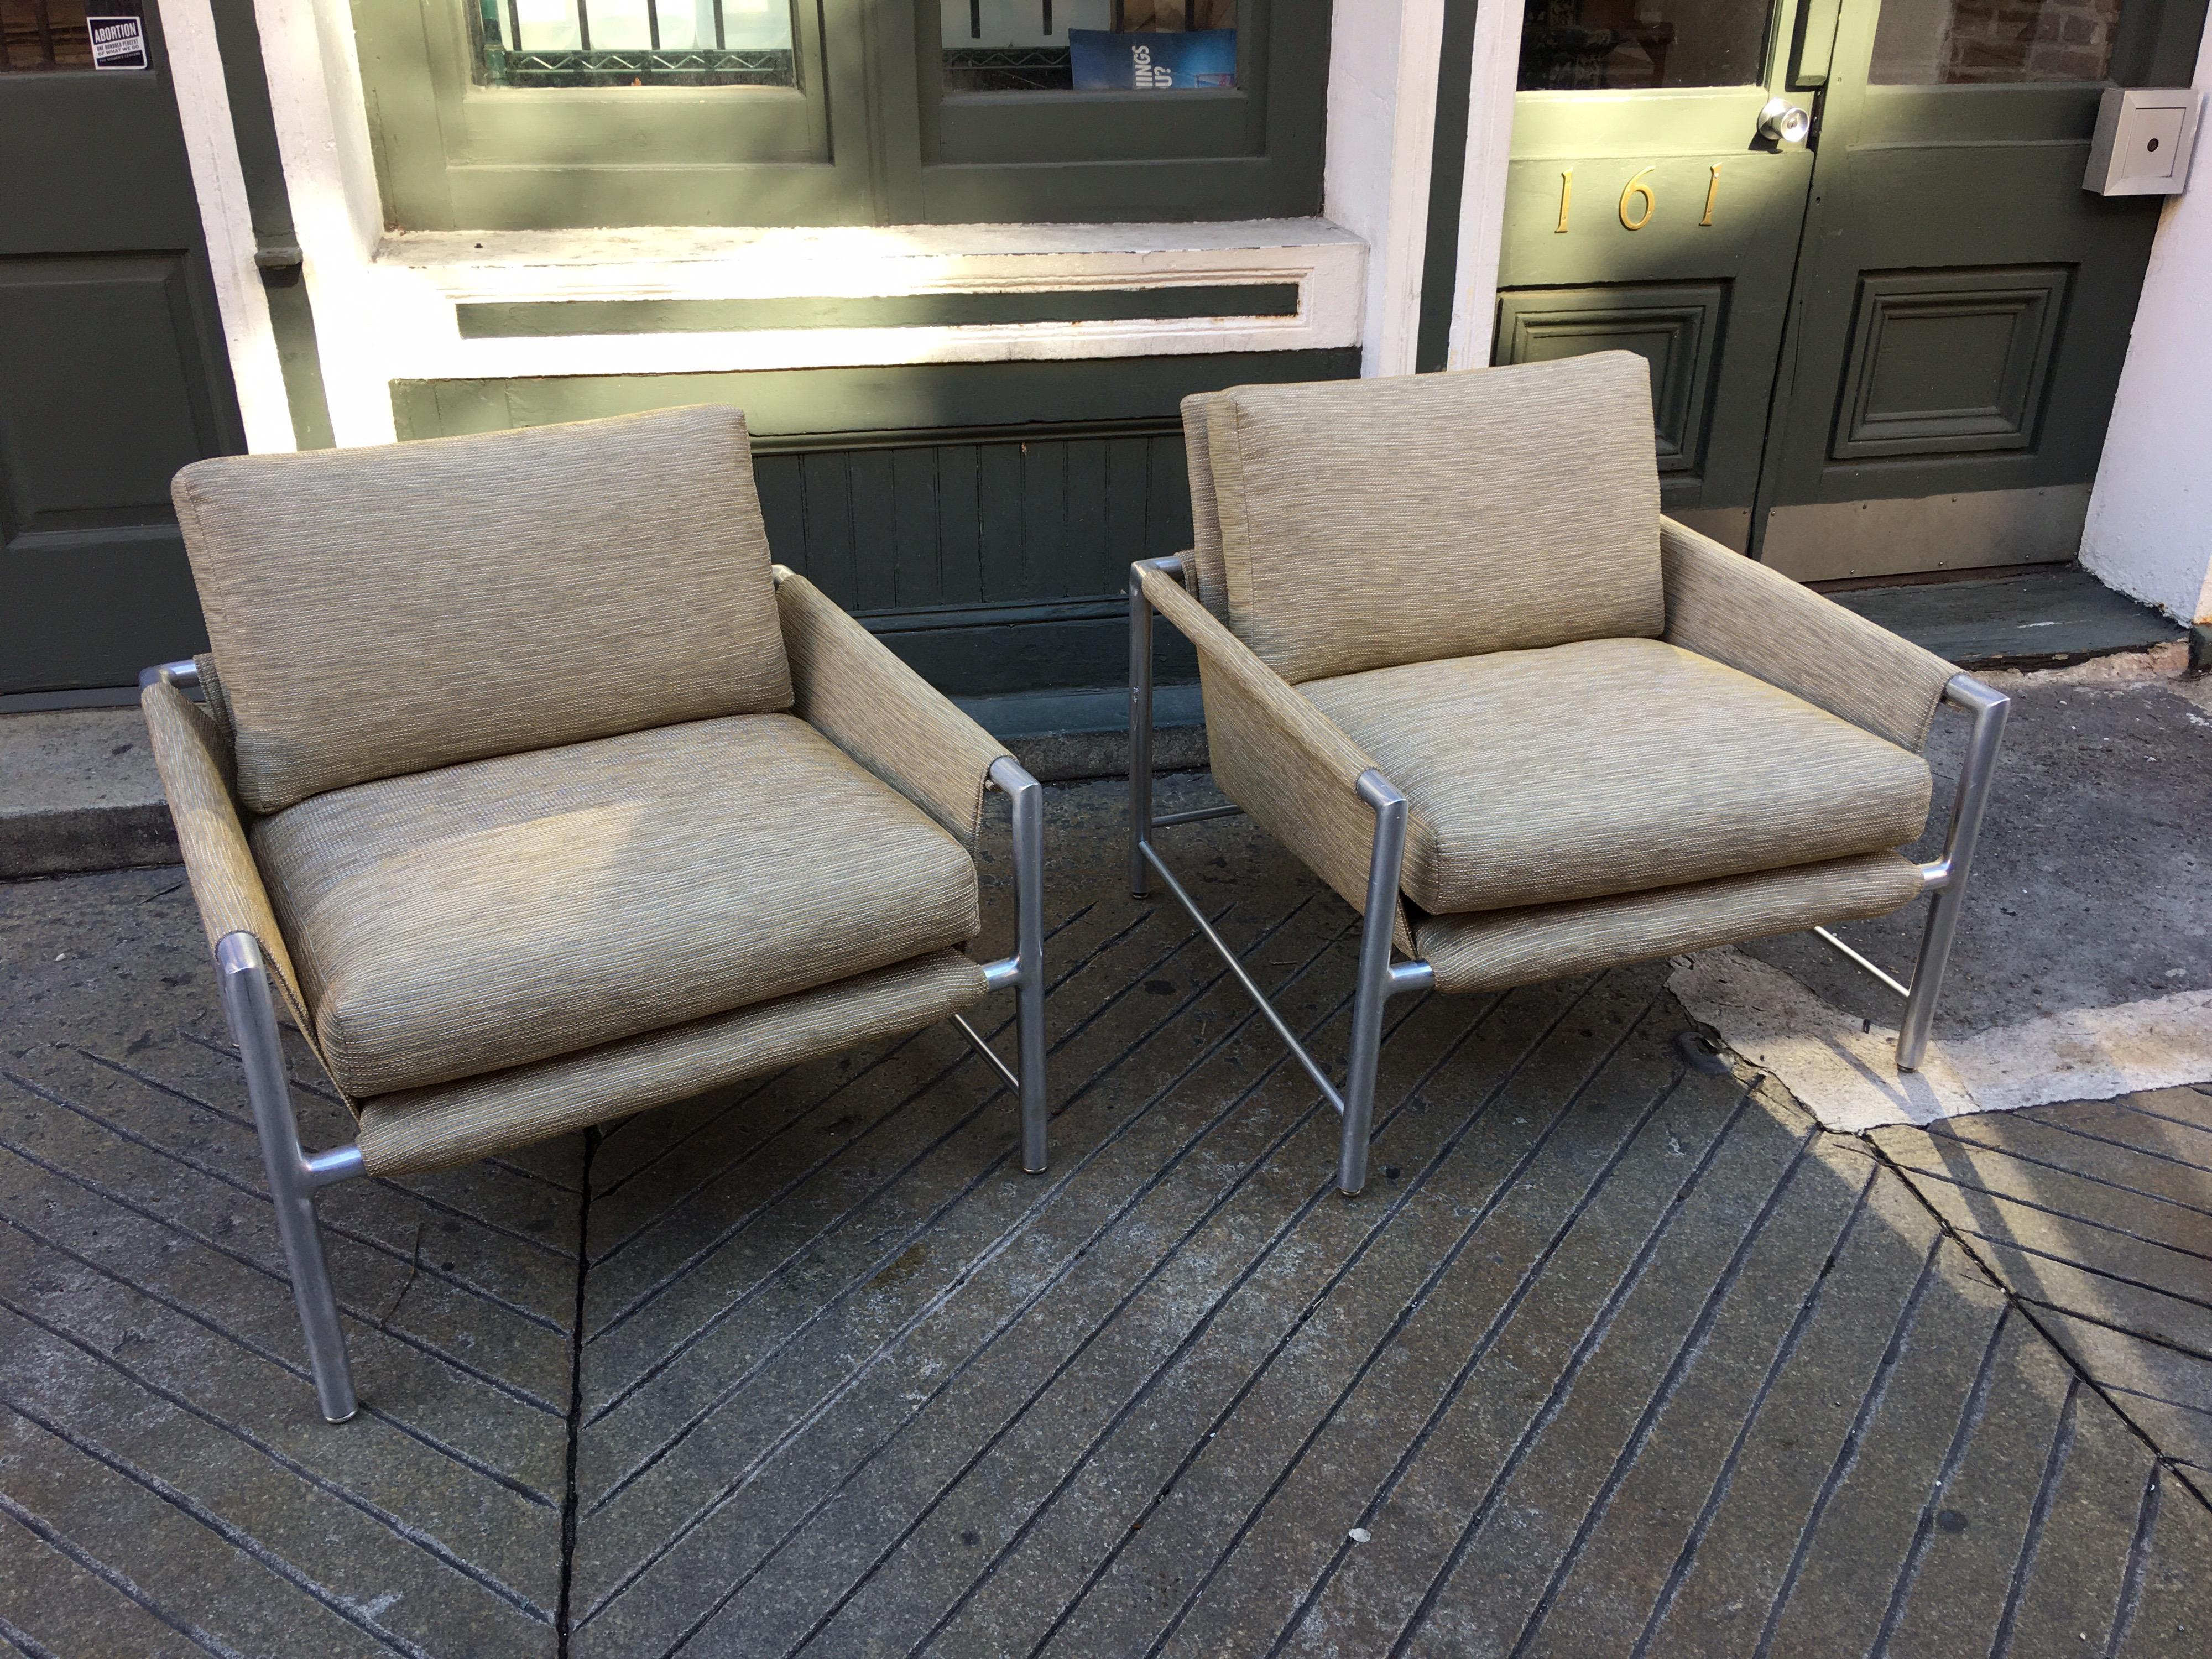 Pair of founders furniture aluminum lounge chairs. Newly re-upholstered and ready to go! Aluminum frames are very solid and all welds are very nicely done. Elegant Design, looking good from all sides!